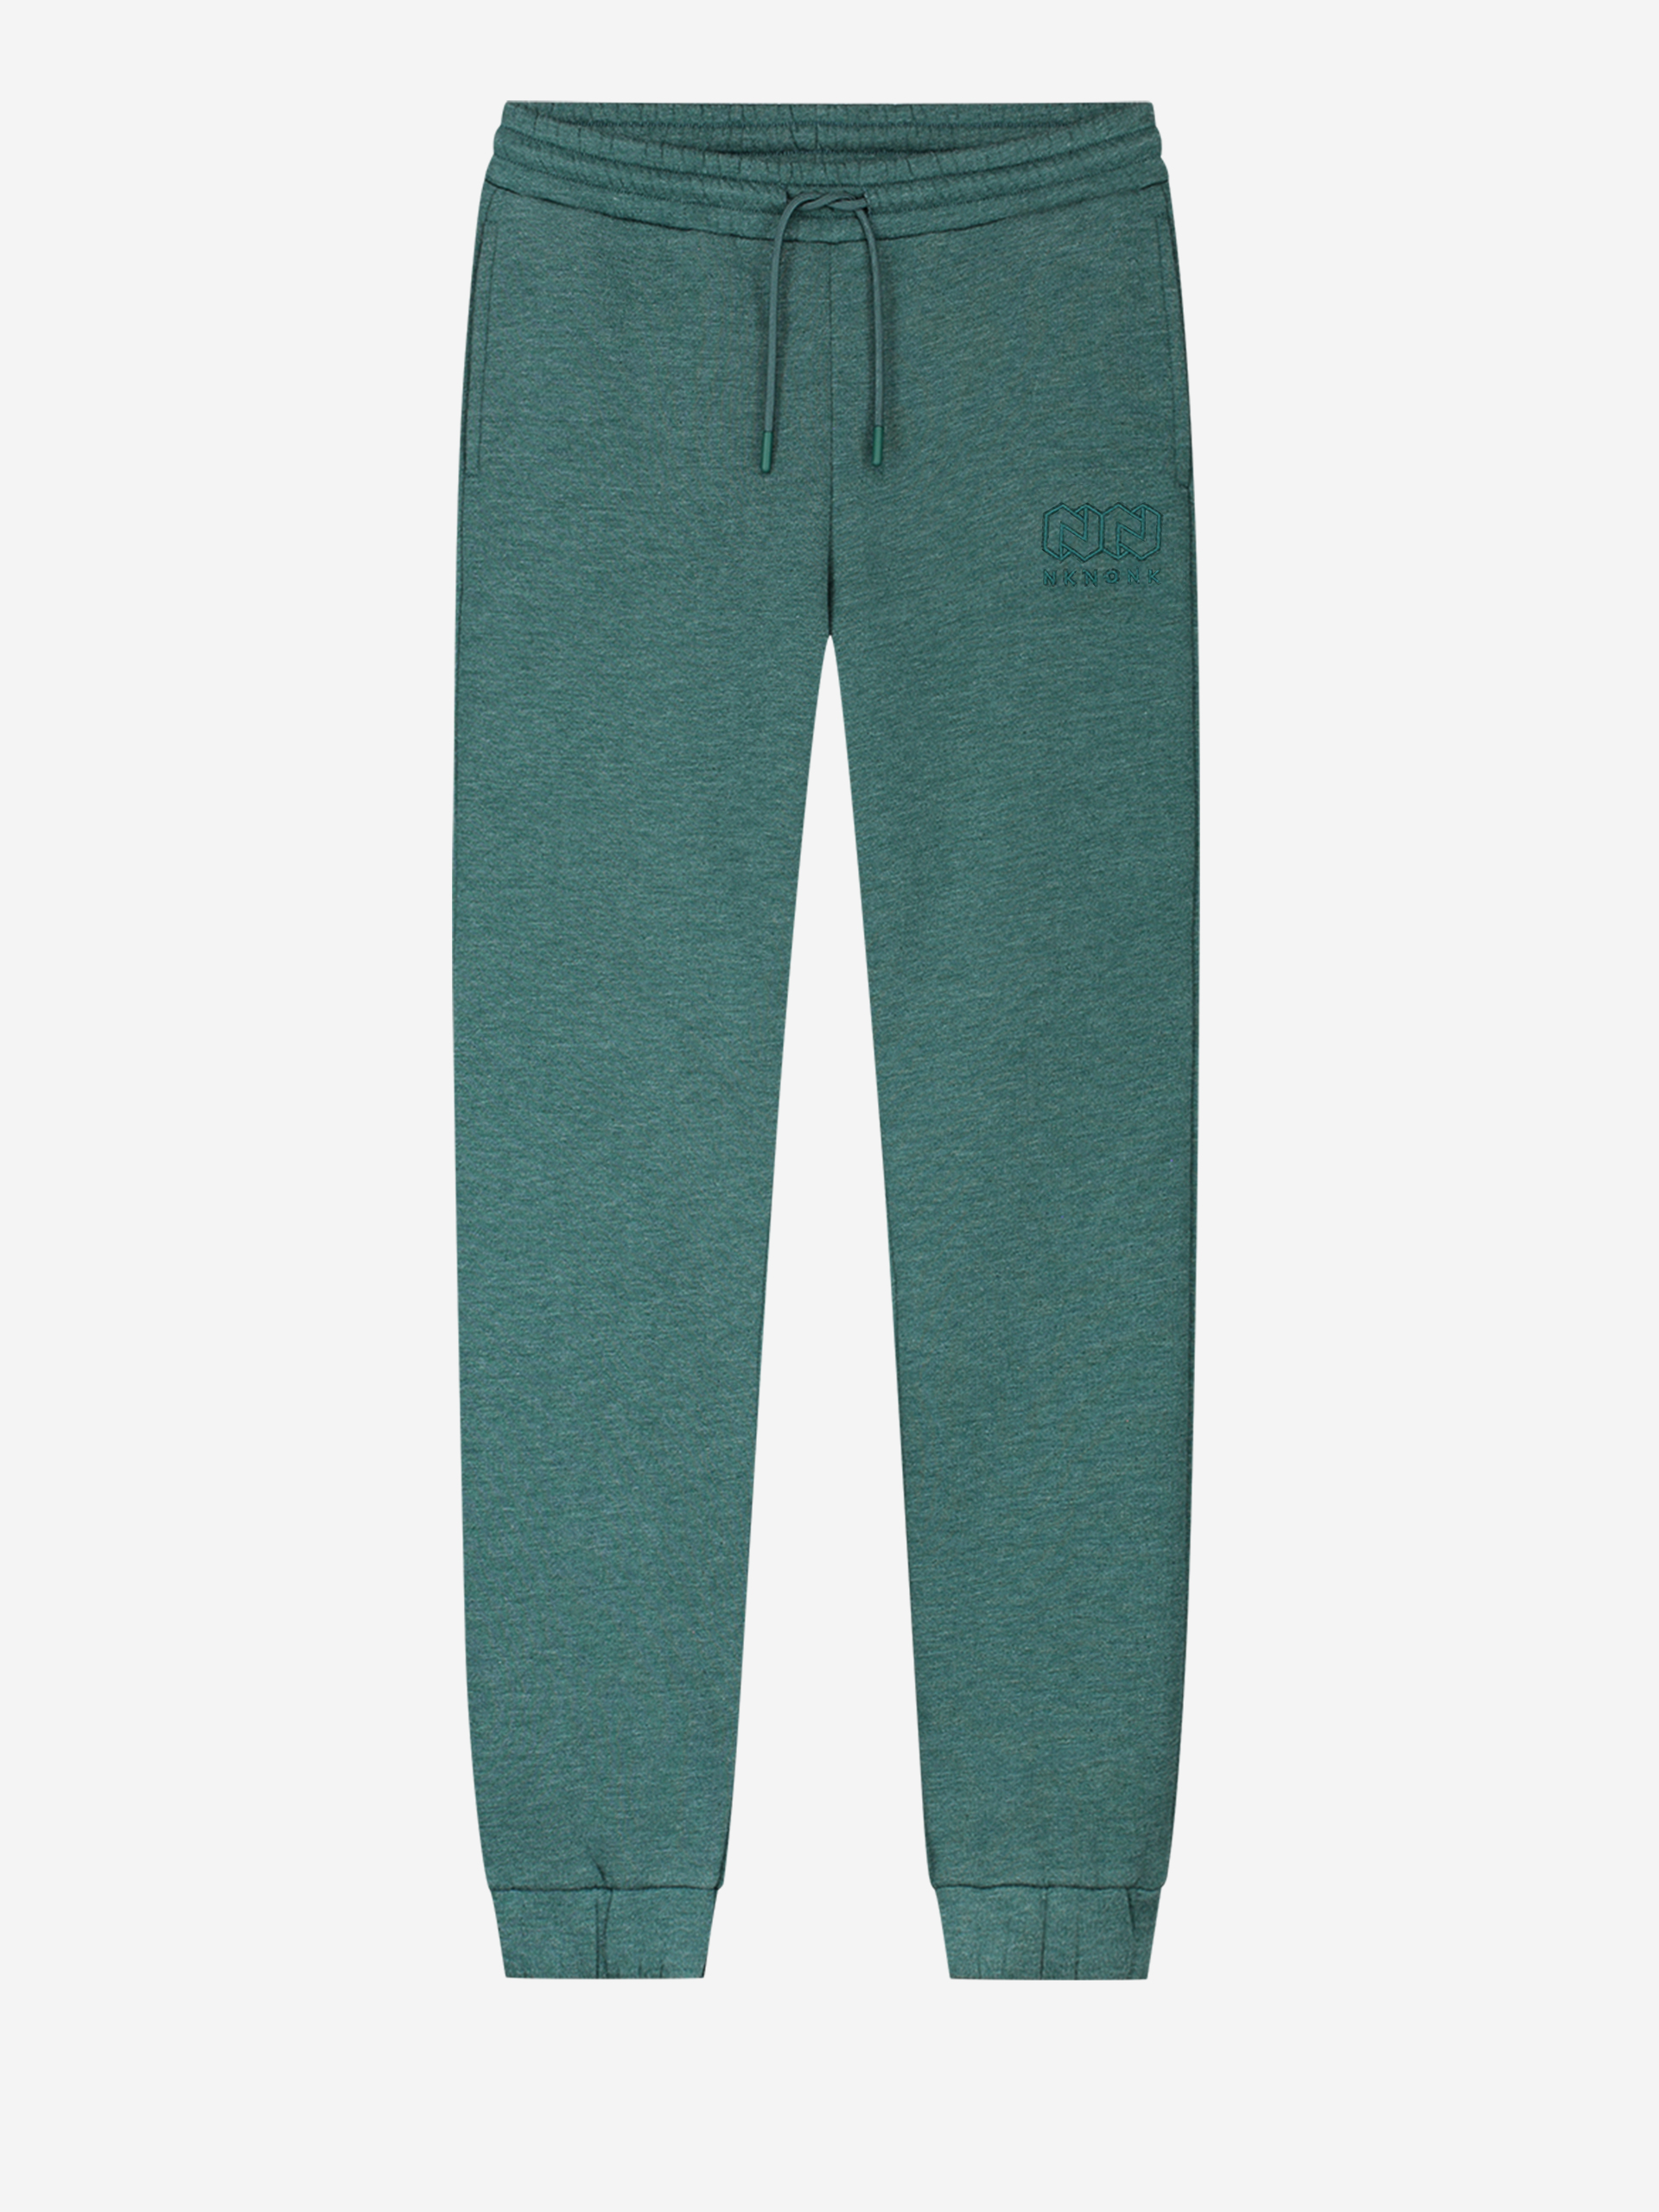 Sweatpants with mid rise and cord